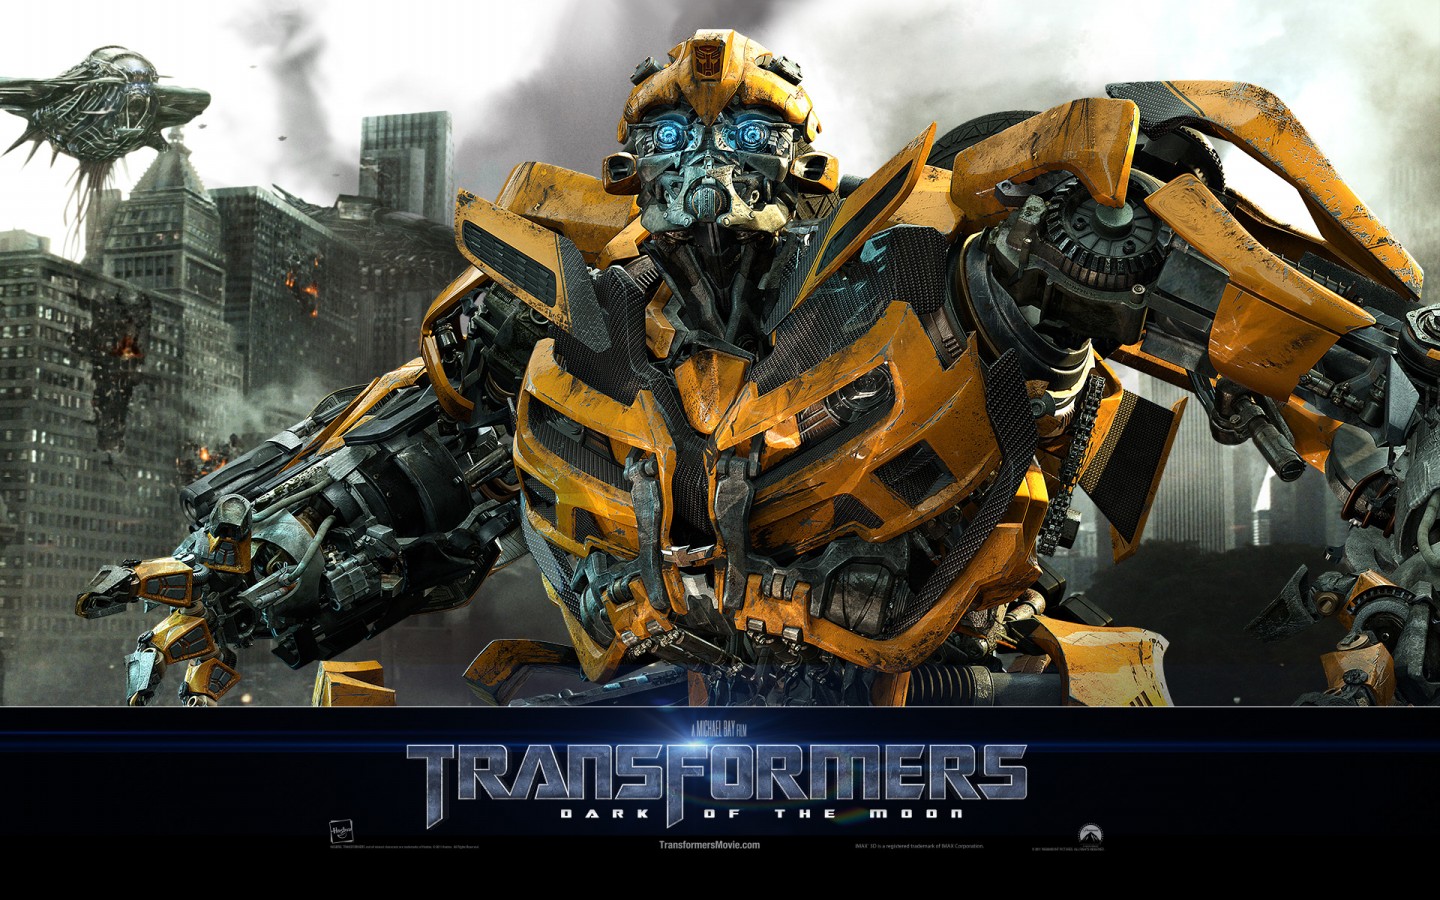 Bumblebee Transformers 3 Pictures HD Wallpaper of Movie